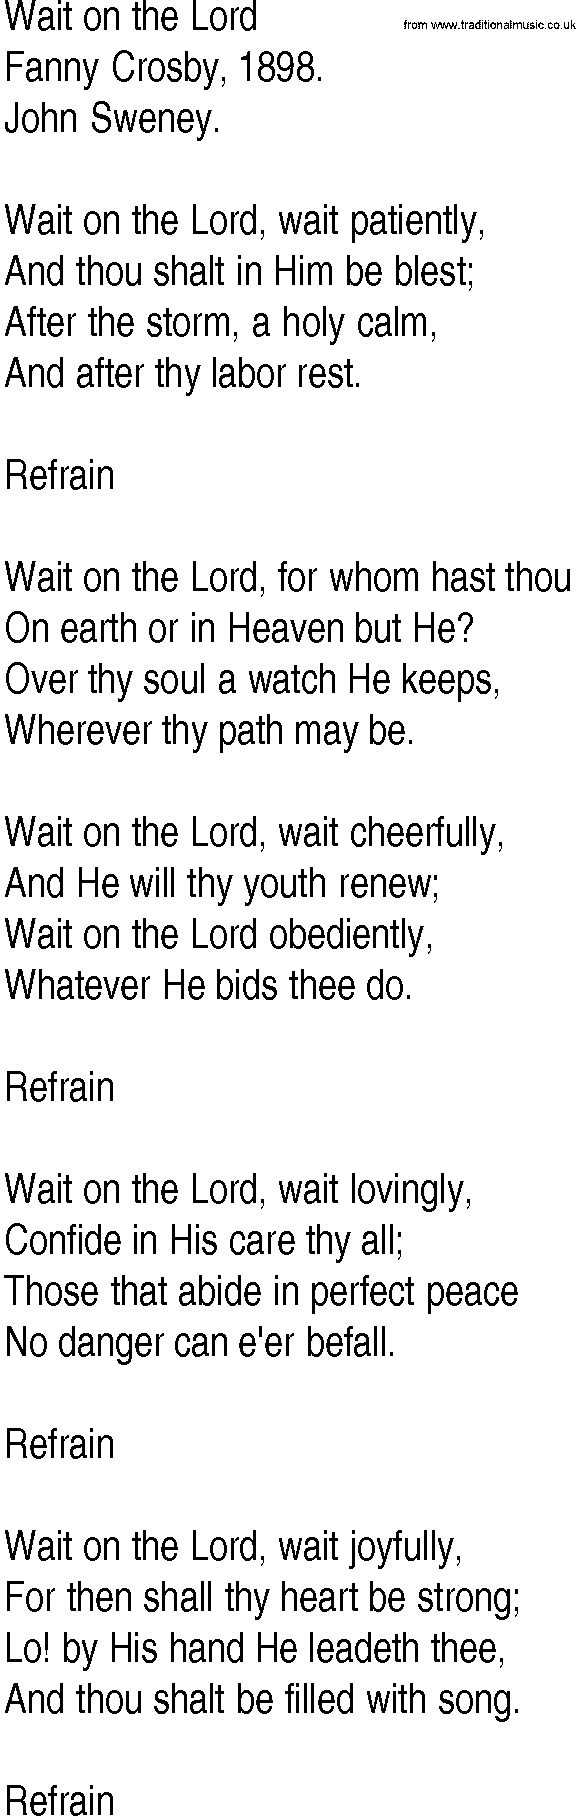 Hymn and Gospel Song: Wait on the Lord by Fanny Crosby lyrics